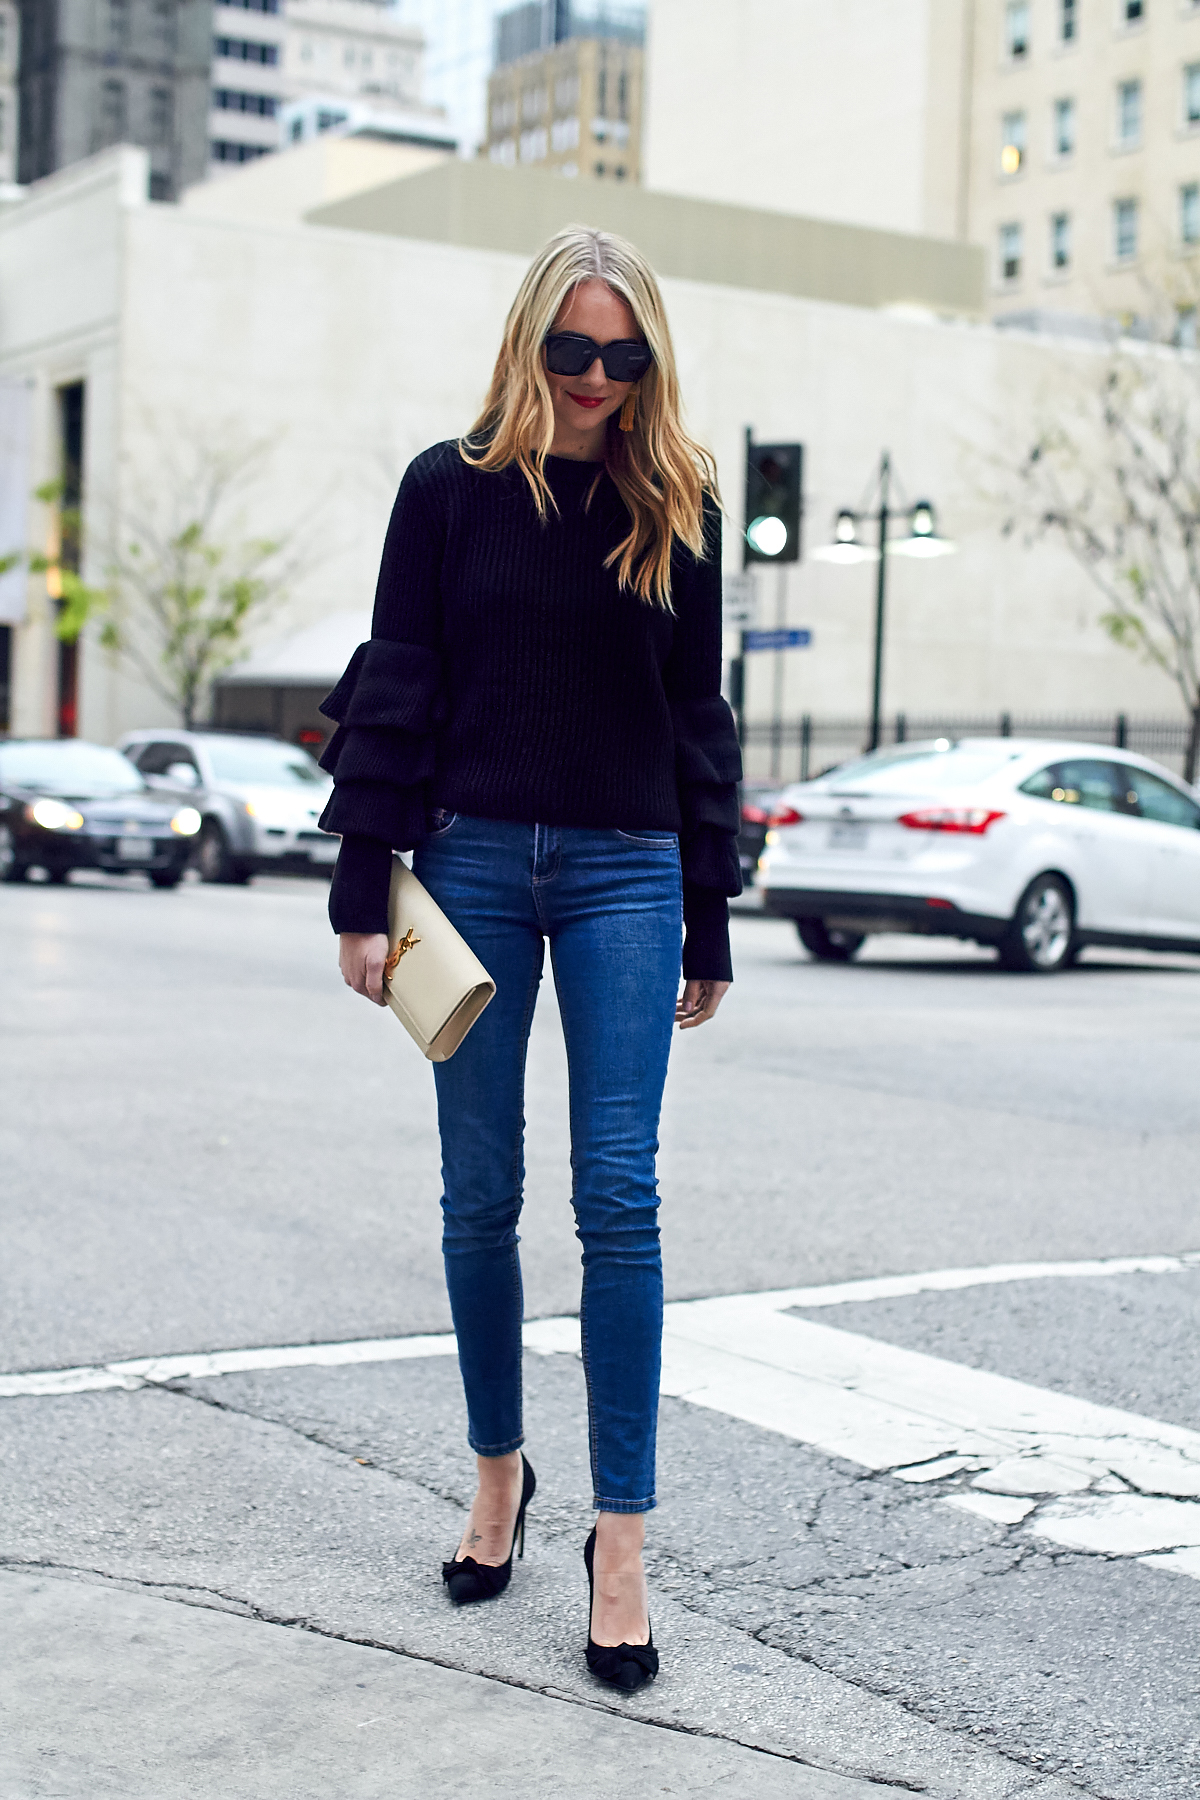 Fall Outfit, Winter Outfit, Ruffle Sleeve Sweater, Denim Skinny Jeans, Black Bow Pumps, Red Lipstick, Saint Laurent Clutch